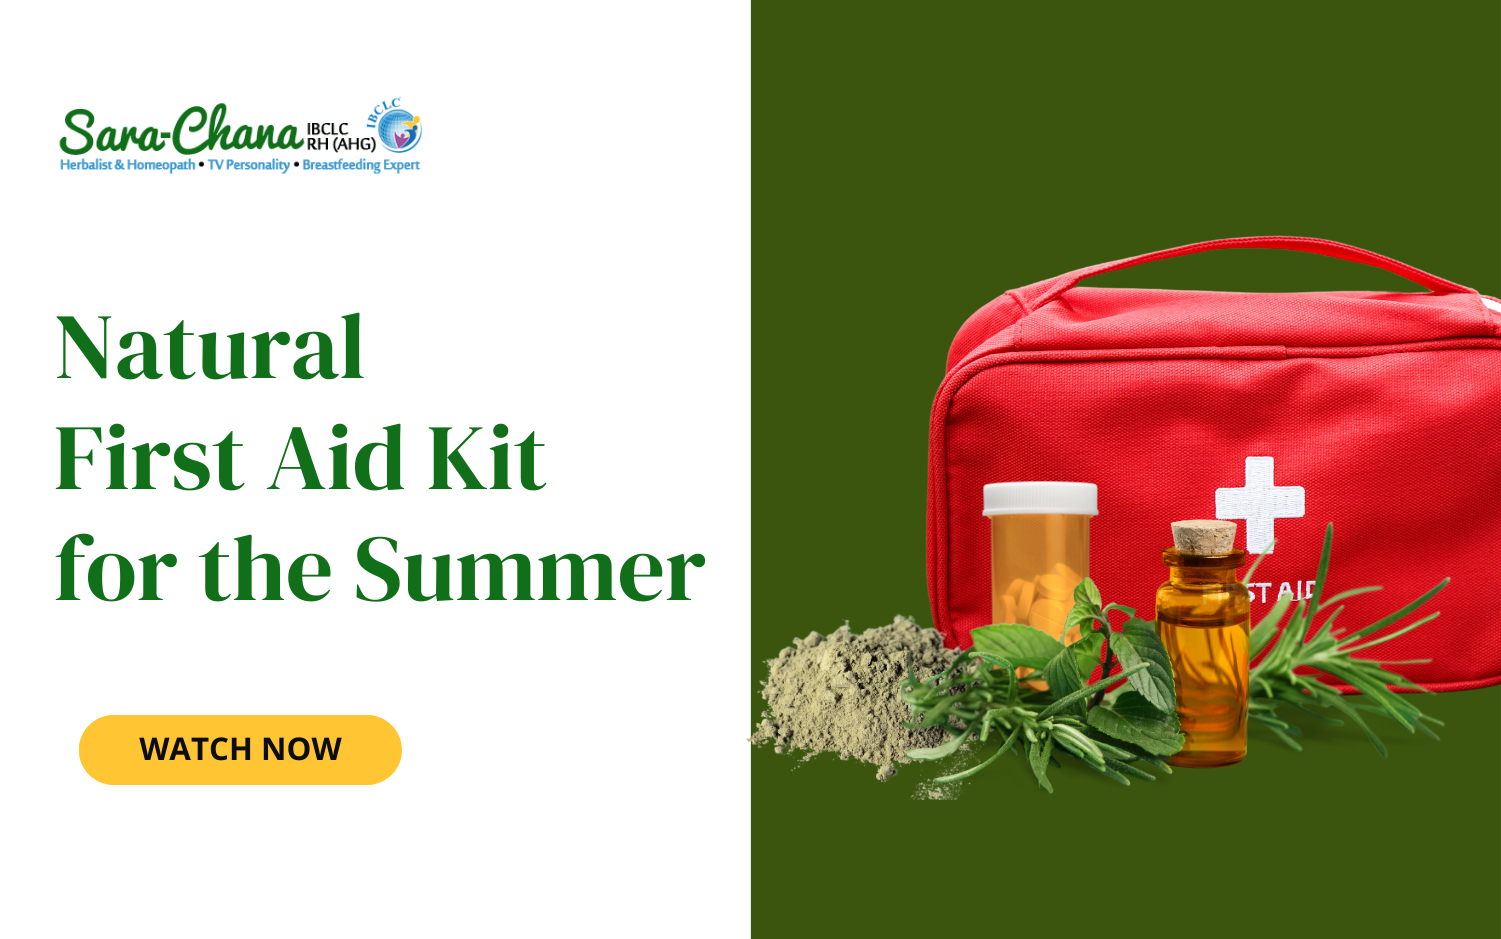 Natural First Aid Kit for the Summer